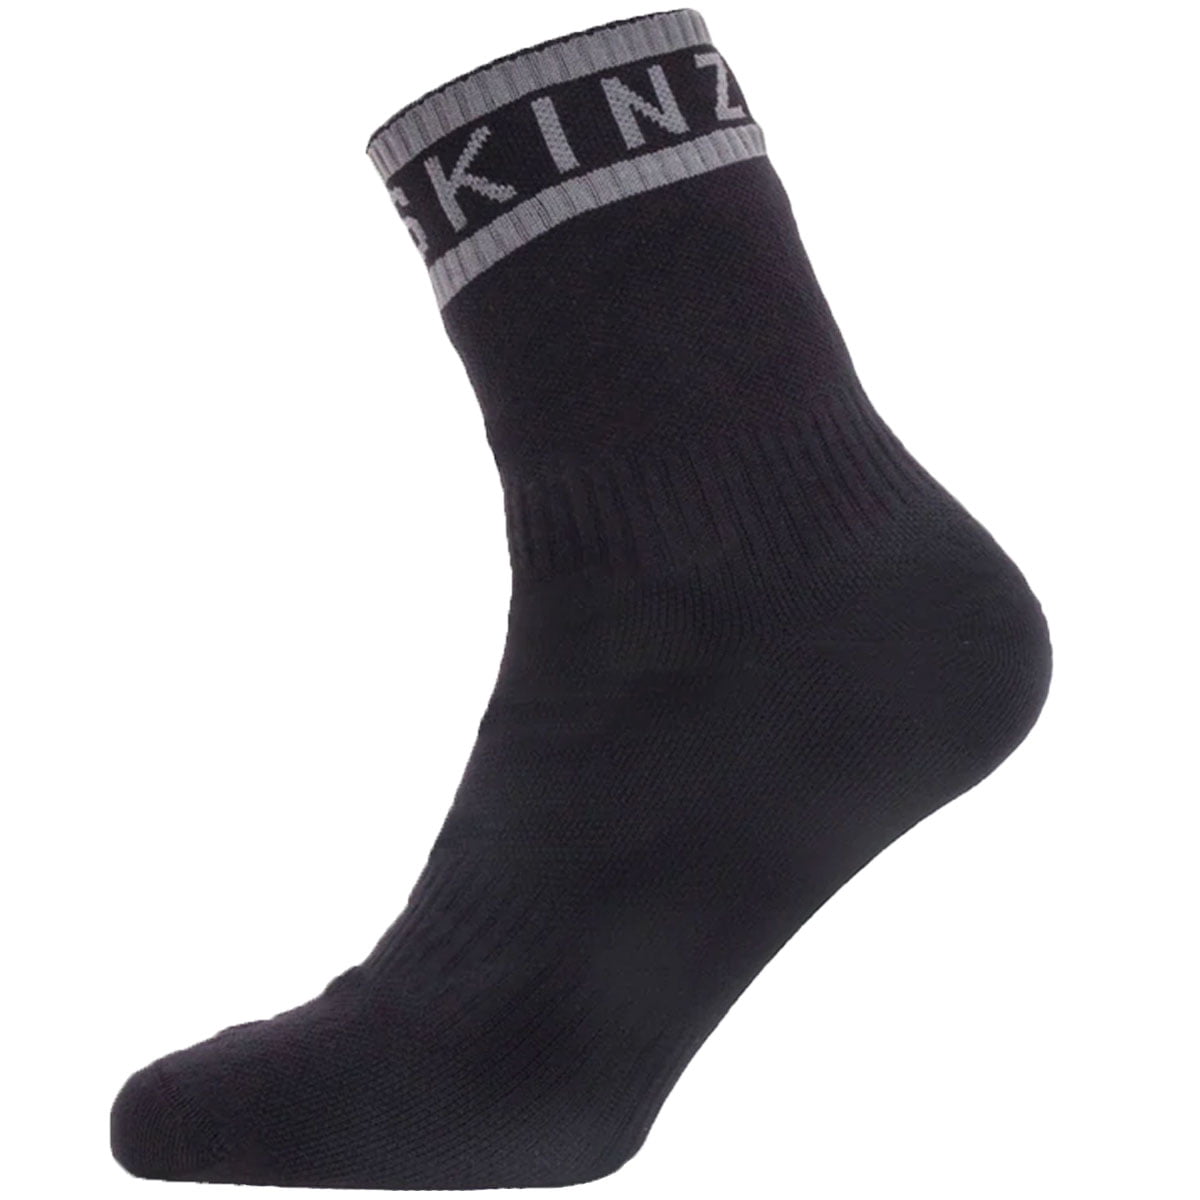 Navy Blue SealSkinz Unisex Adult Waterproof Warm Weather Ankle Length Sock with Hydrostop X-Large 